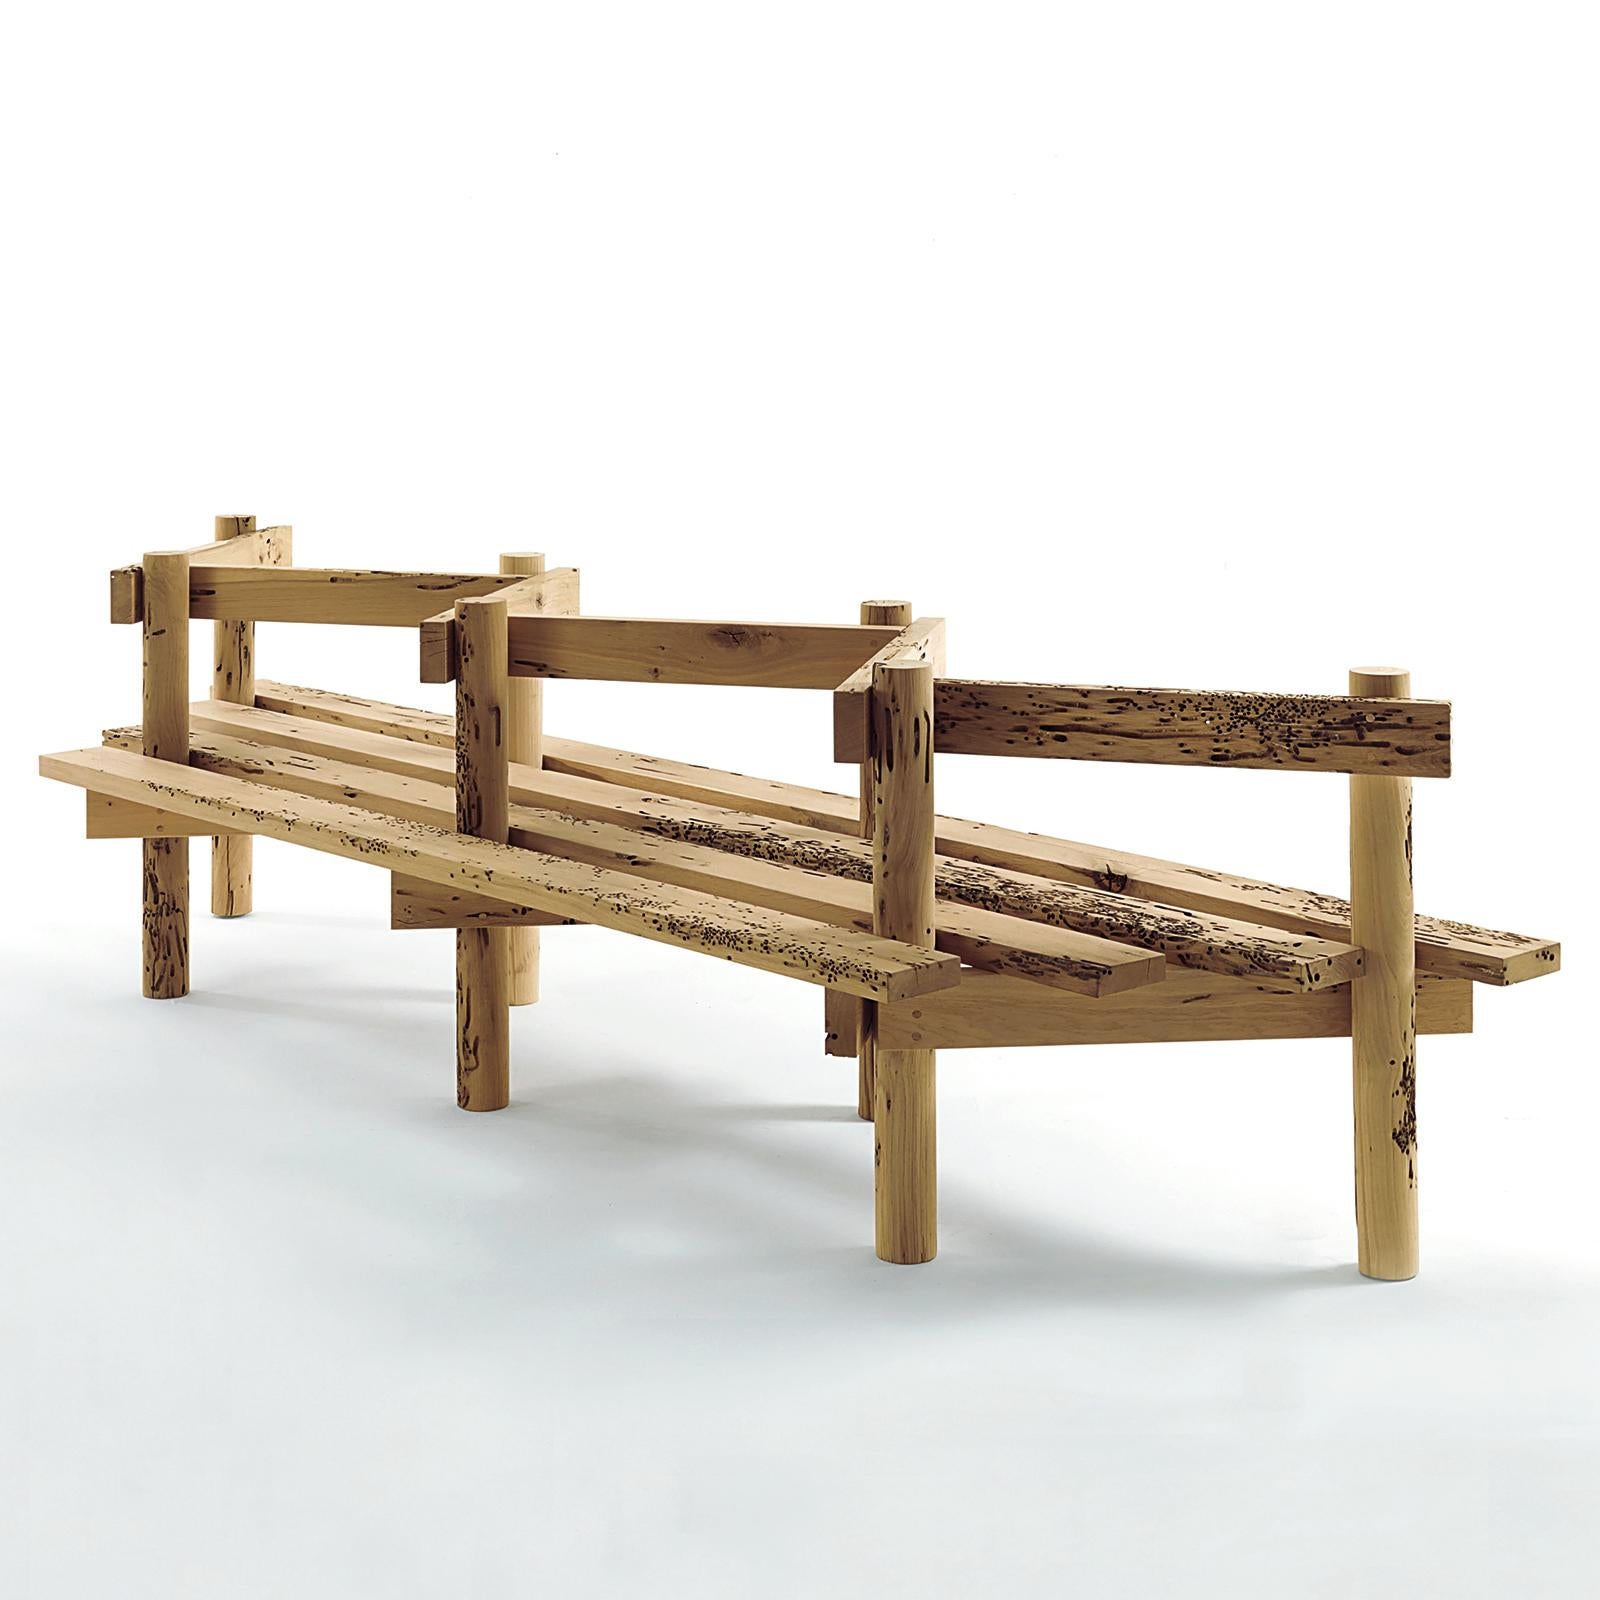 Bench recto verso with all structure, backrests
And seats made in solid oak from Venice wood 
pillars/poles. Oak treated with natural pine extracts 
Wax. Each piece is a bit different due to the unique
Solid oak parts selected to produce the